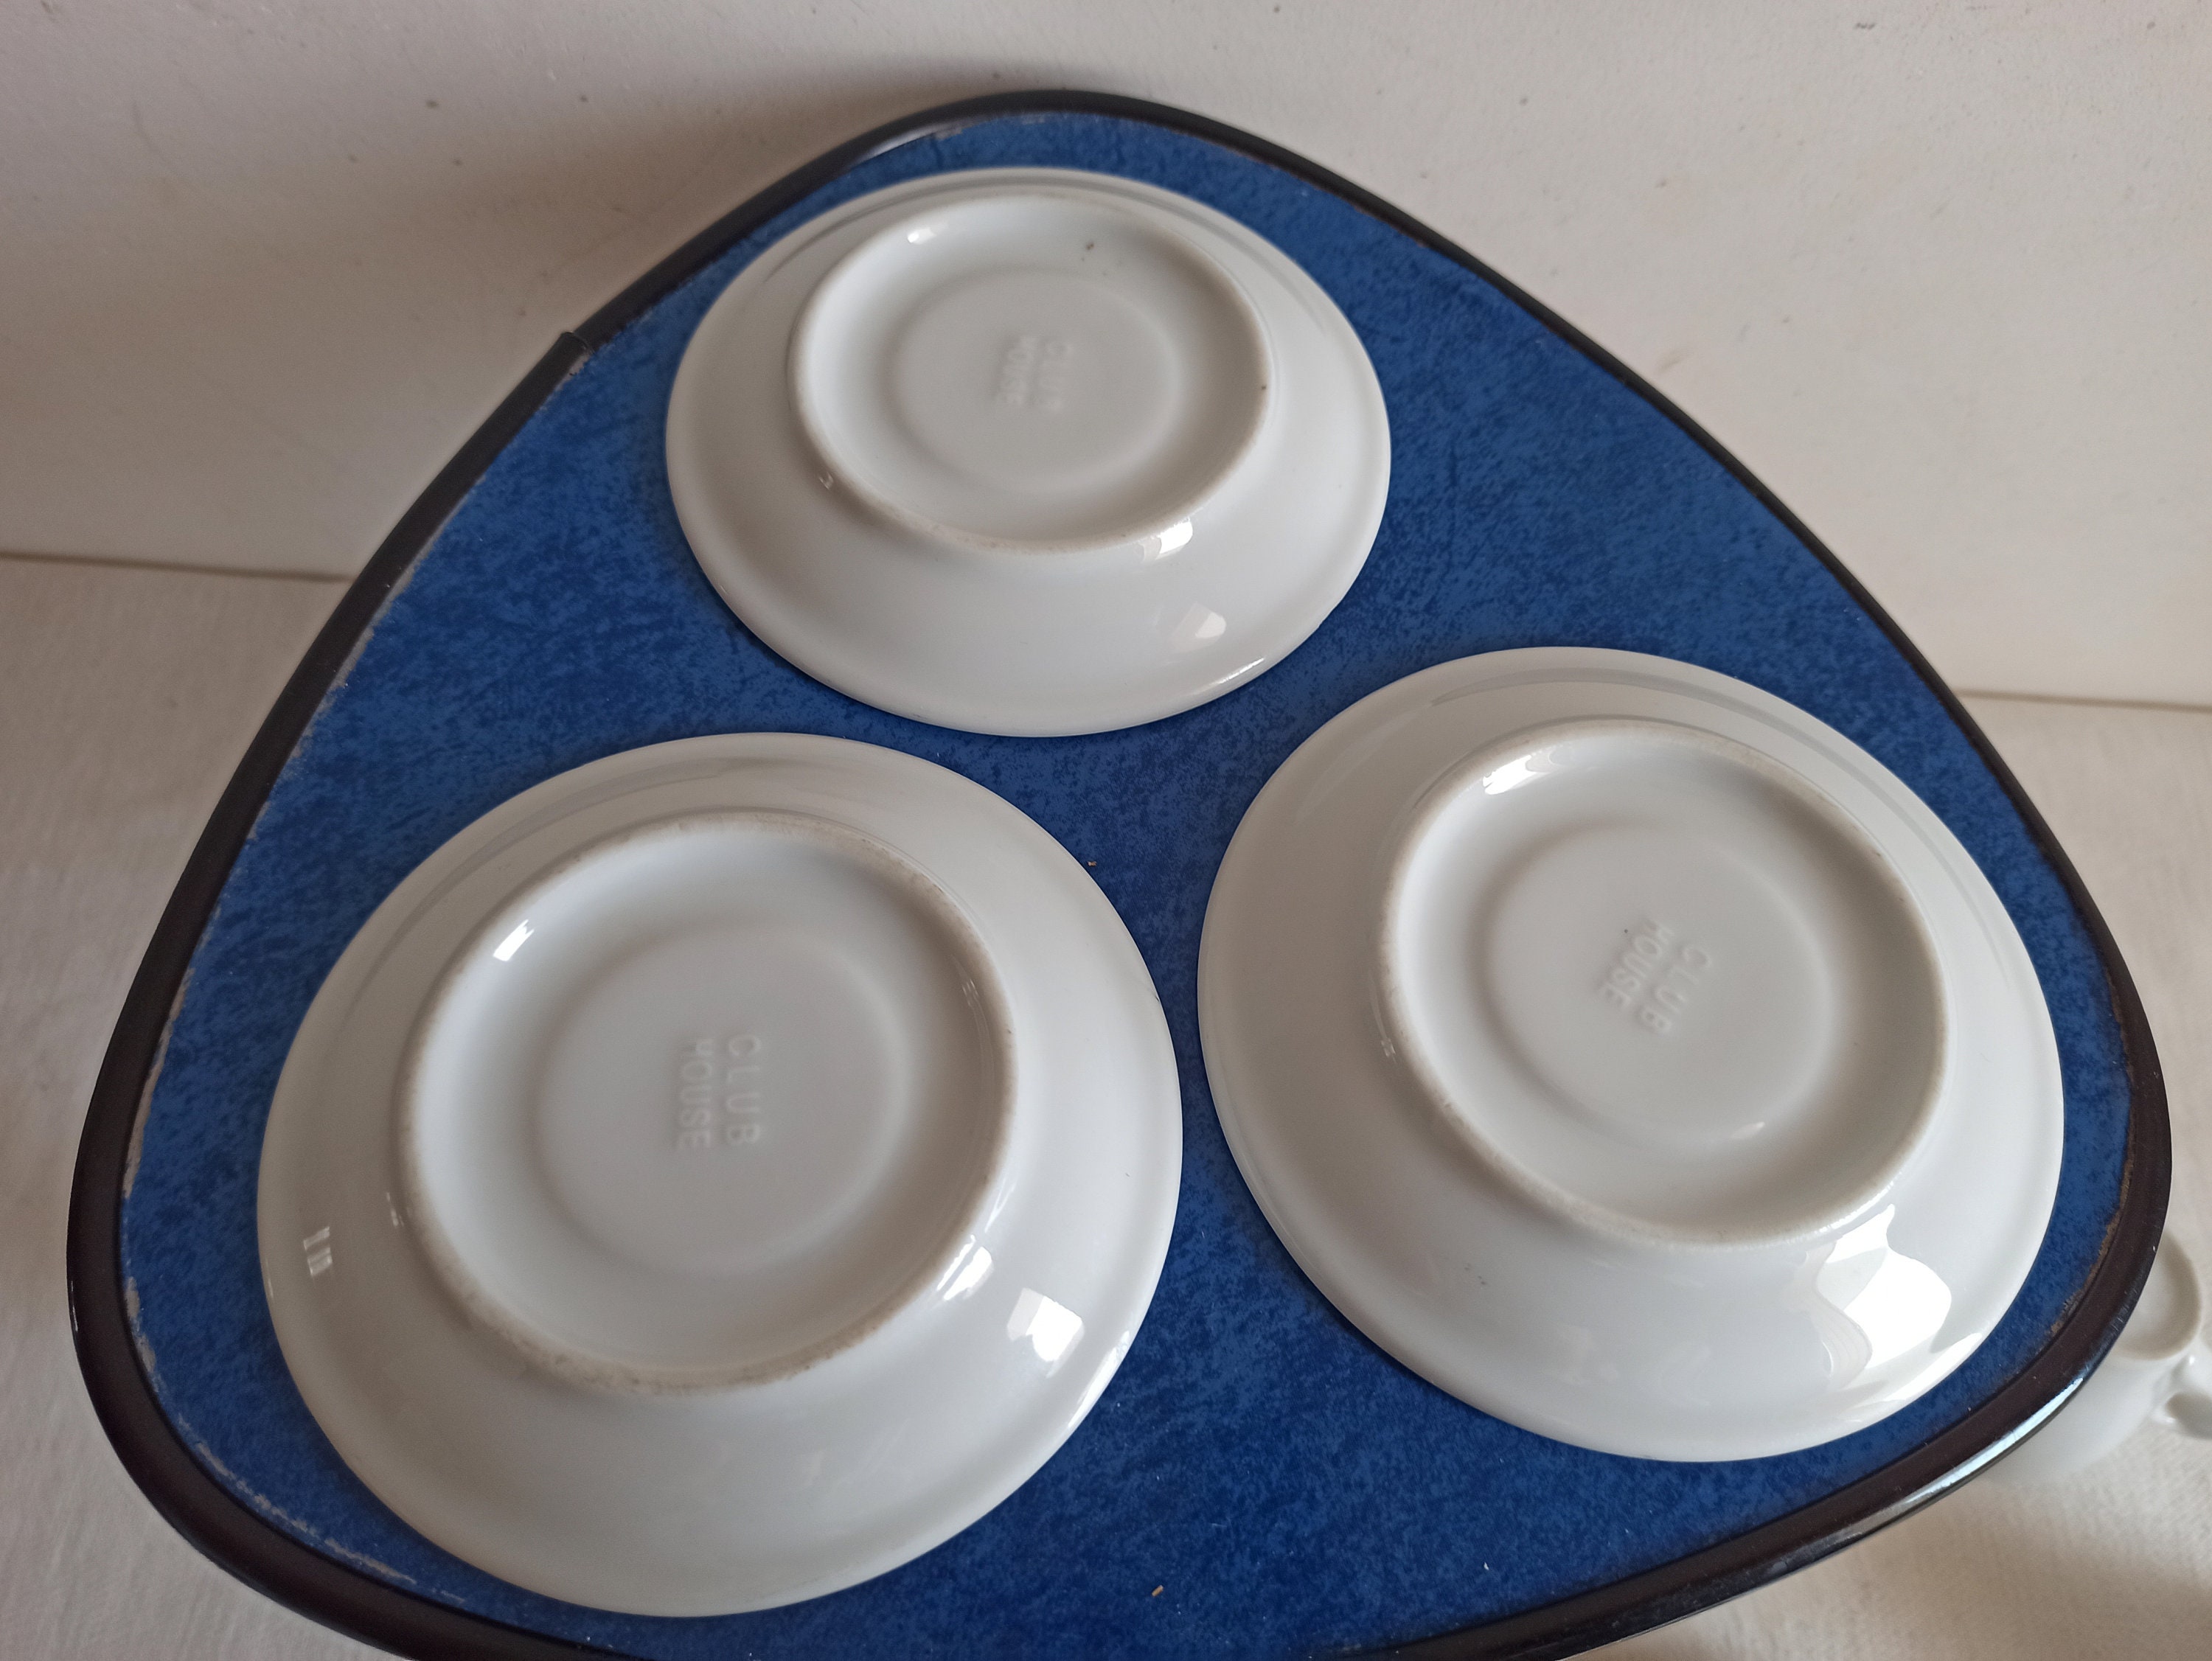 Nice Set of Three Espresso Cups, Bar Cups, Italian Espresso Cups, Marked  Club House Made in Italy 